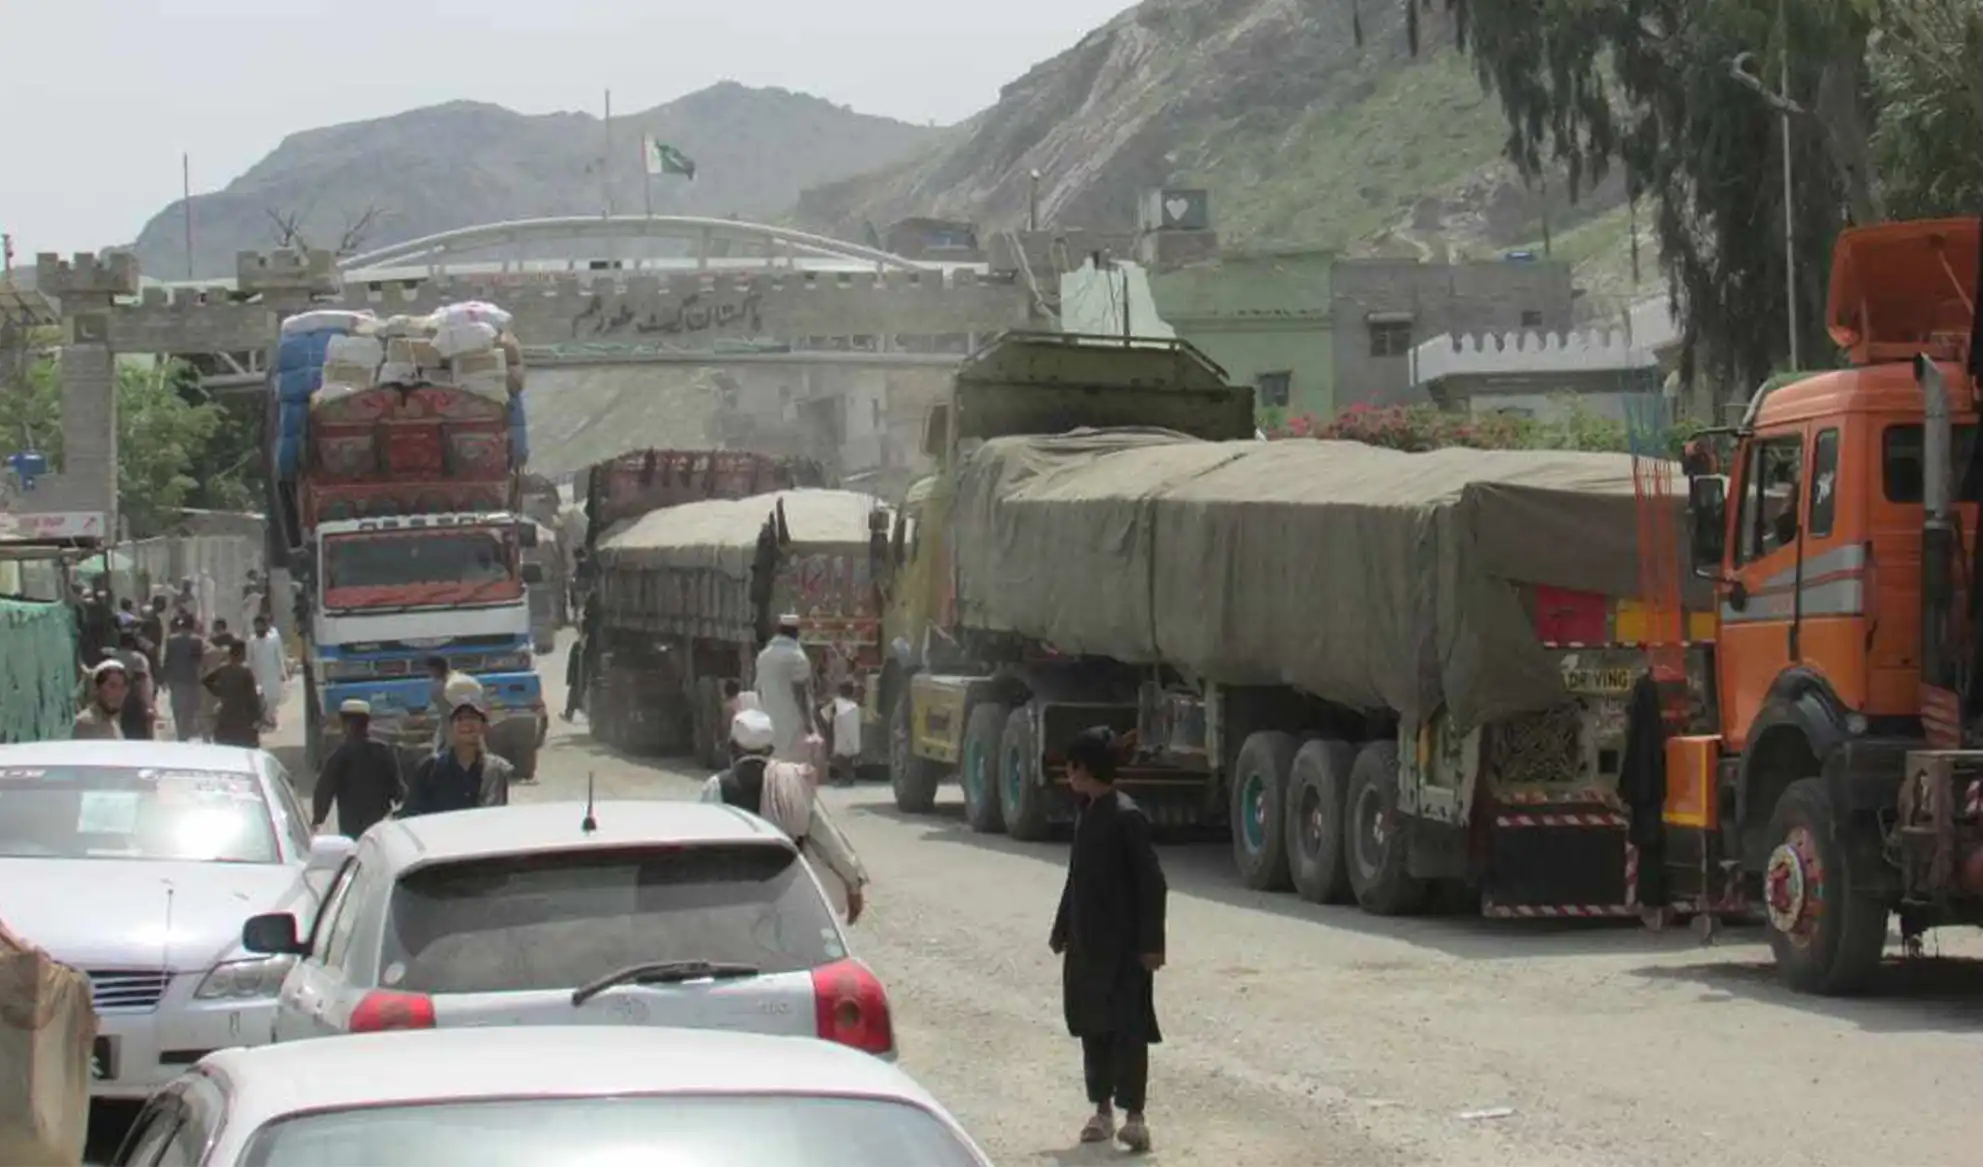 Afghan traders, truckers say harassed, delayed at Torkham